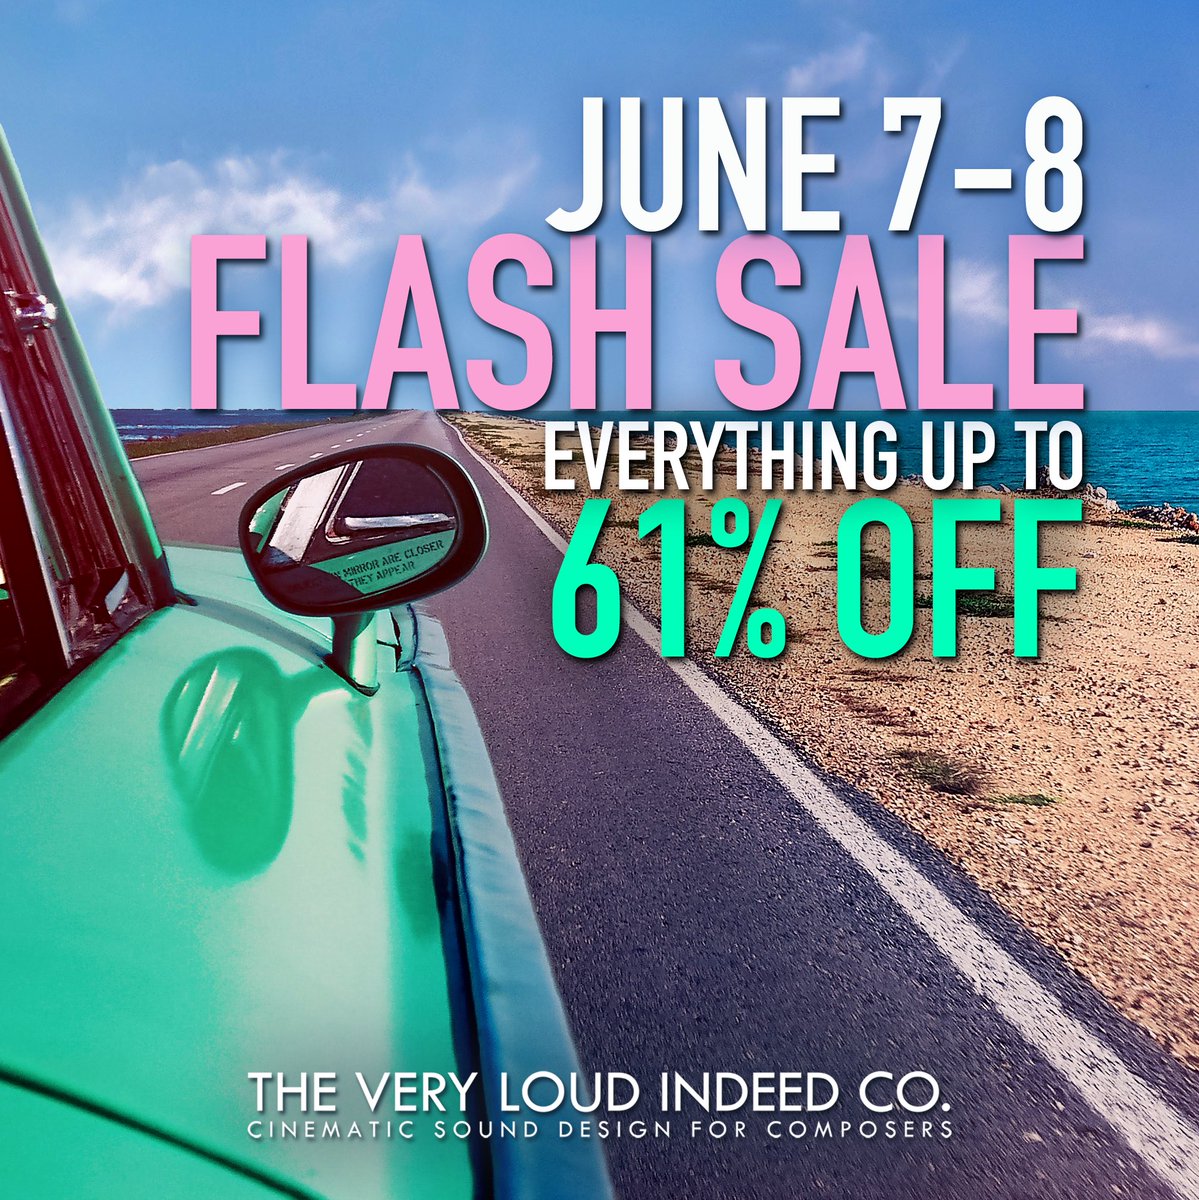 Save up to 61% on all our products on June 7th and 8th at veryloudindeed.com #samplelibrary #kontakt #composer #filmcomposer #musicproducer #musicproduction #synth @uheplugins @NI_News @Spectrasonics